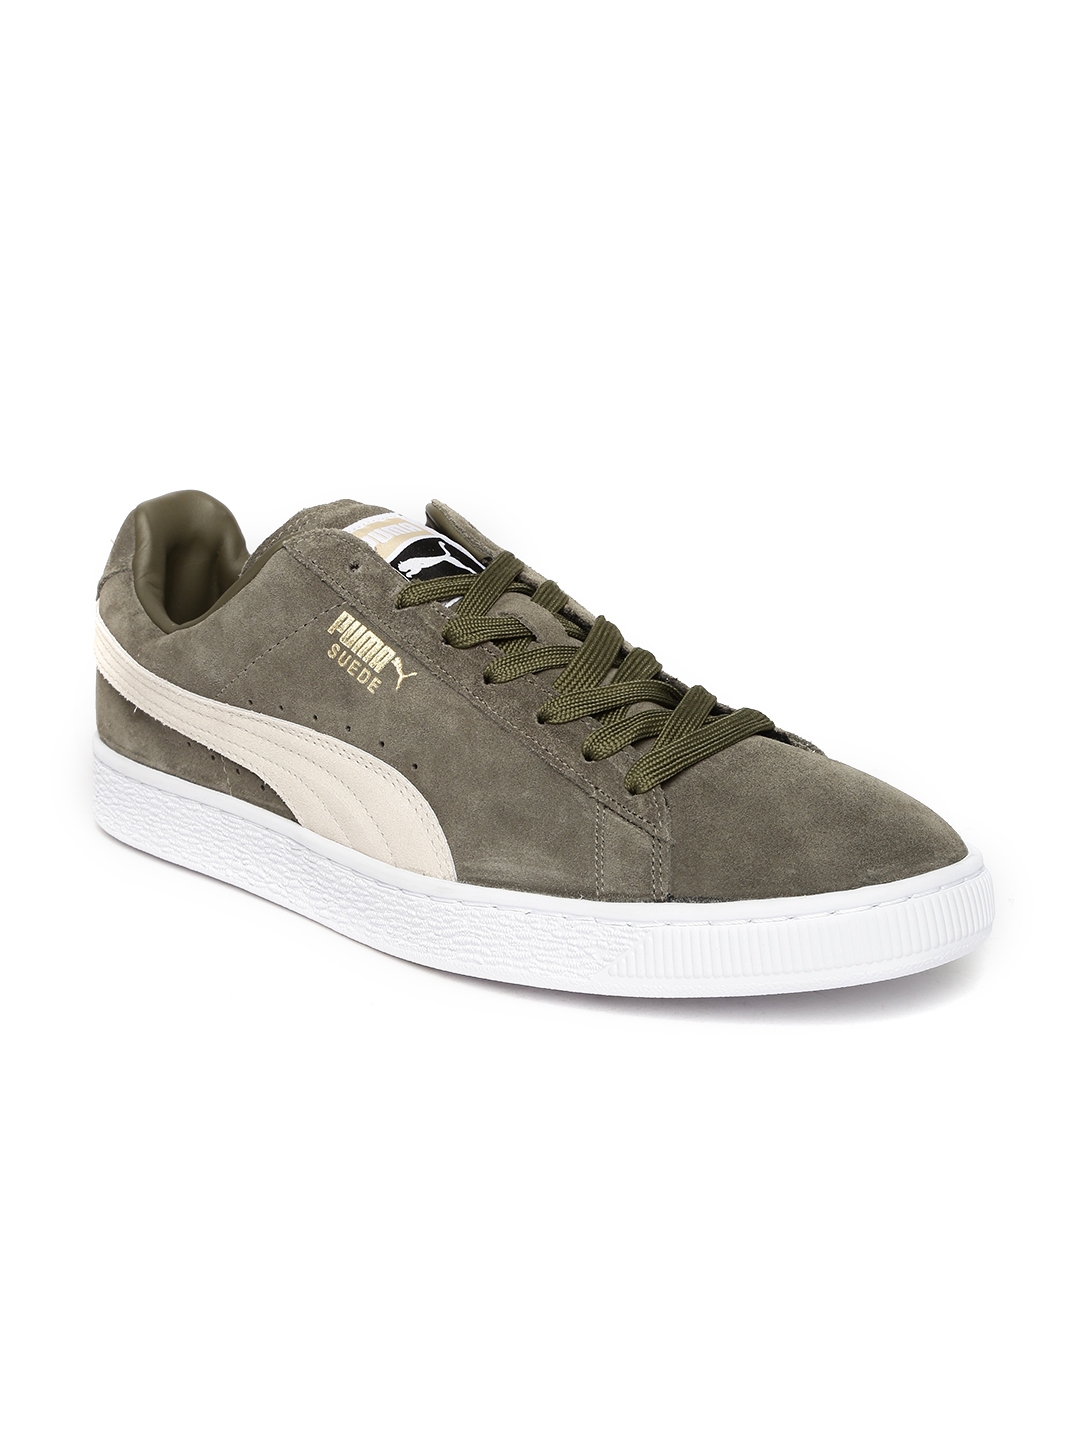 Puma Olive Green Suede Sneakers | atelier-yuwa.ciao.jp